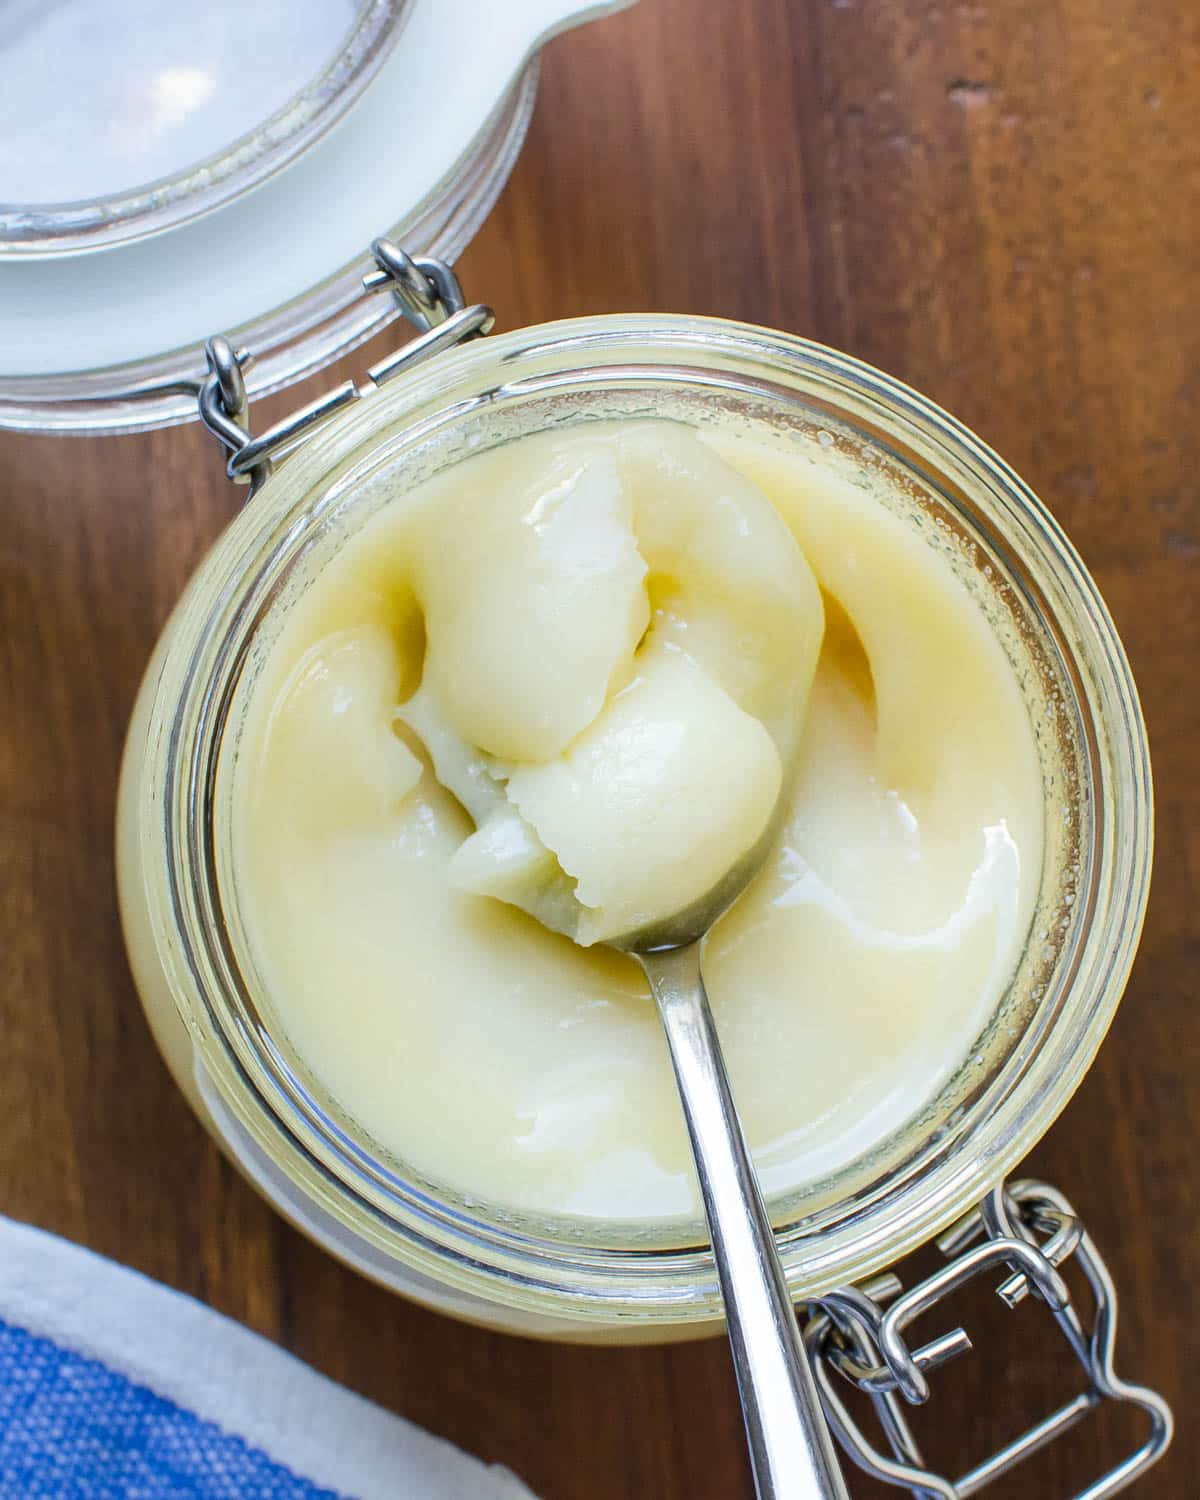 A jar of duck fat for flavoring.